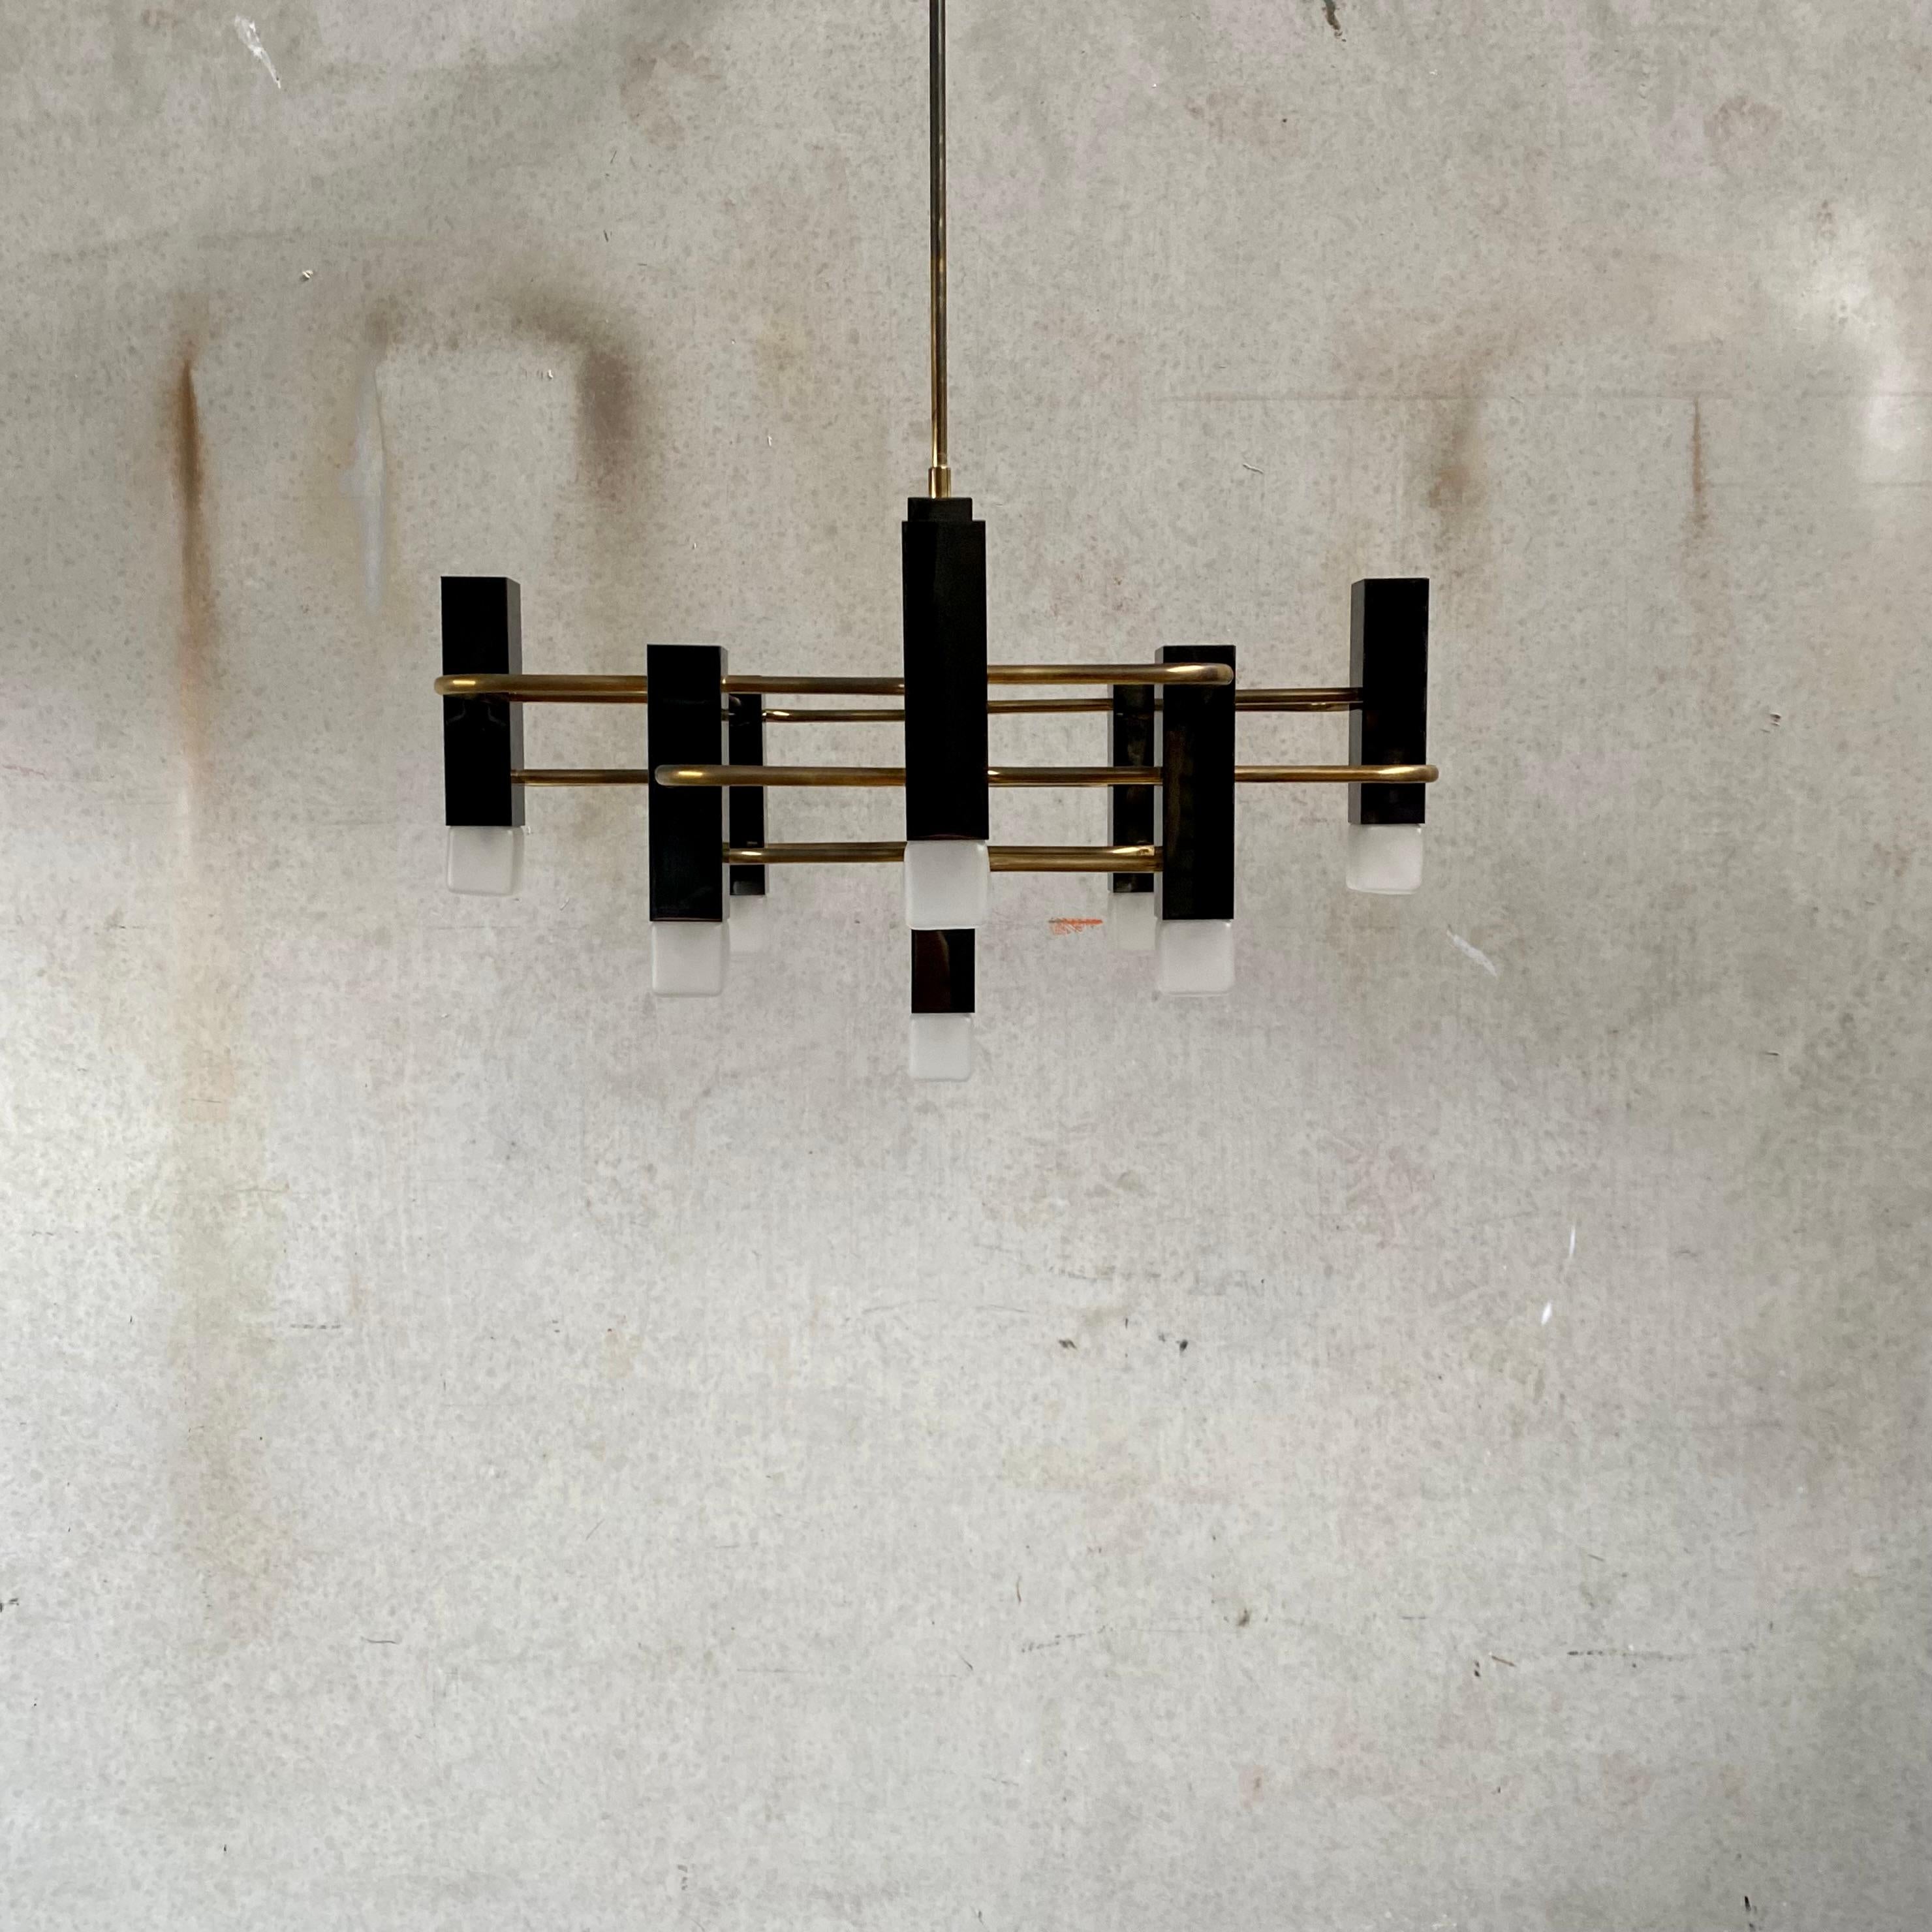 Introducing the Boulanger Chandelier: A Strikingly Modernist Masterpiece by Gaetano Sciolari

Elevate your space with the breathtaking Boulanger Chandelier, a stunning testament to the visionary design prowess of the esteemed Italian designer and